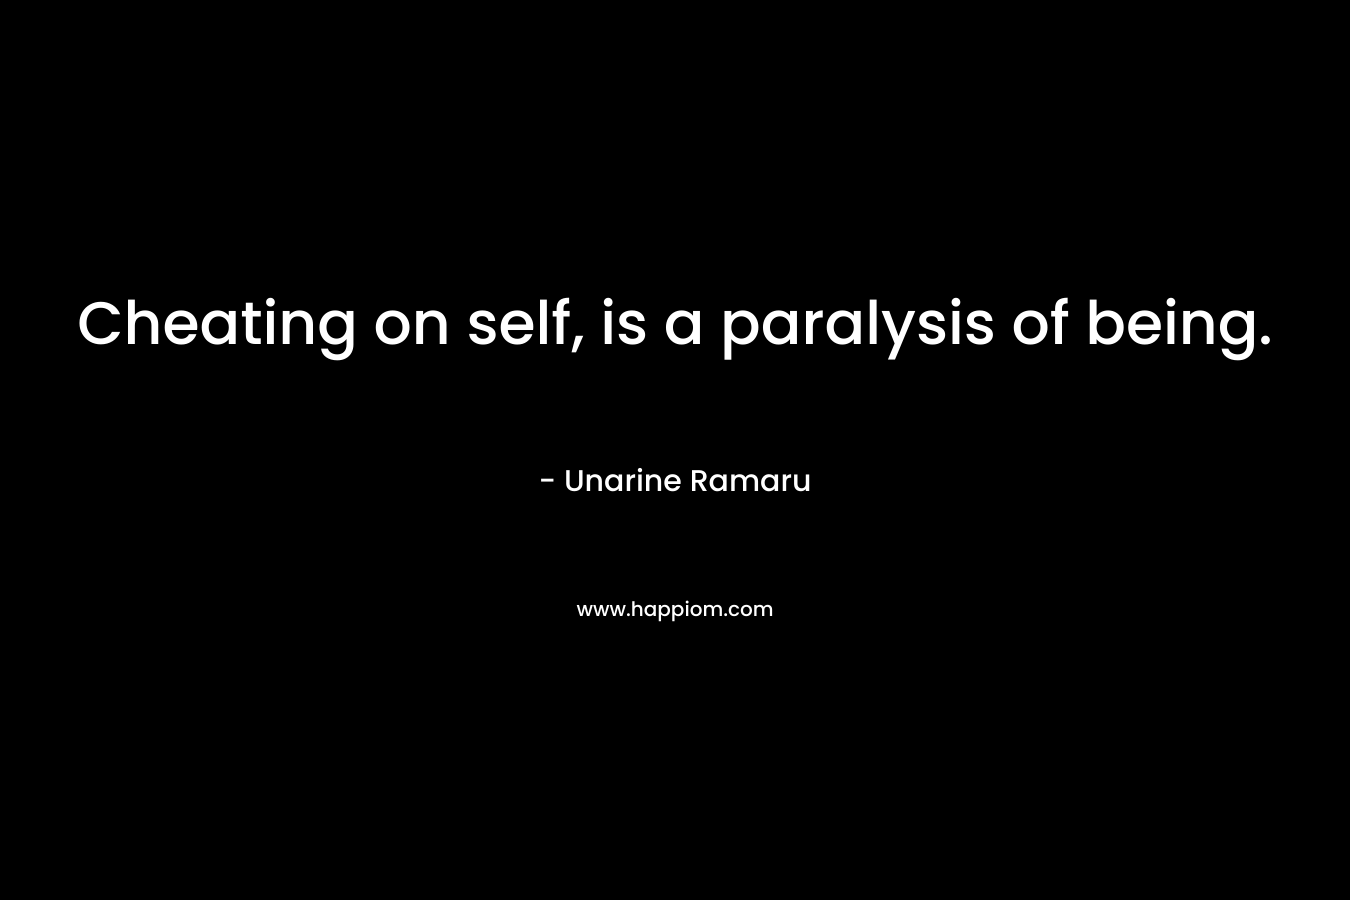 Cheating on self, is a paralysis of being. – Unarine Ramaru